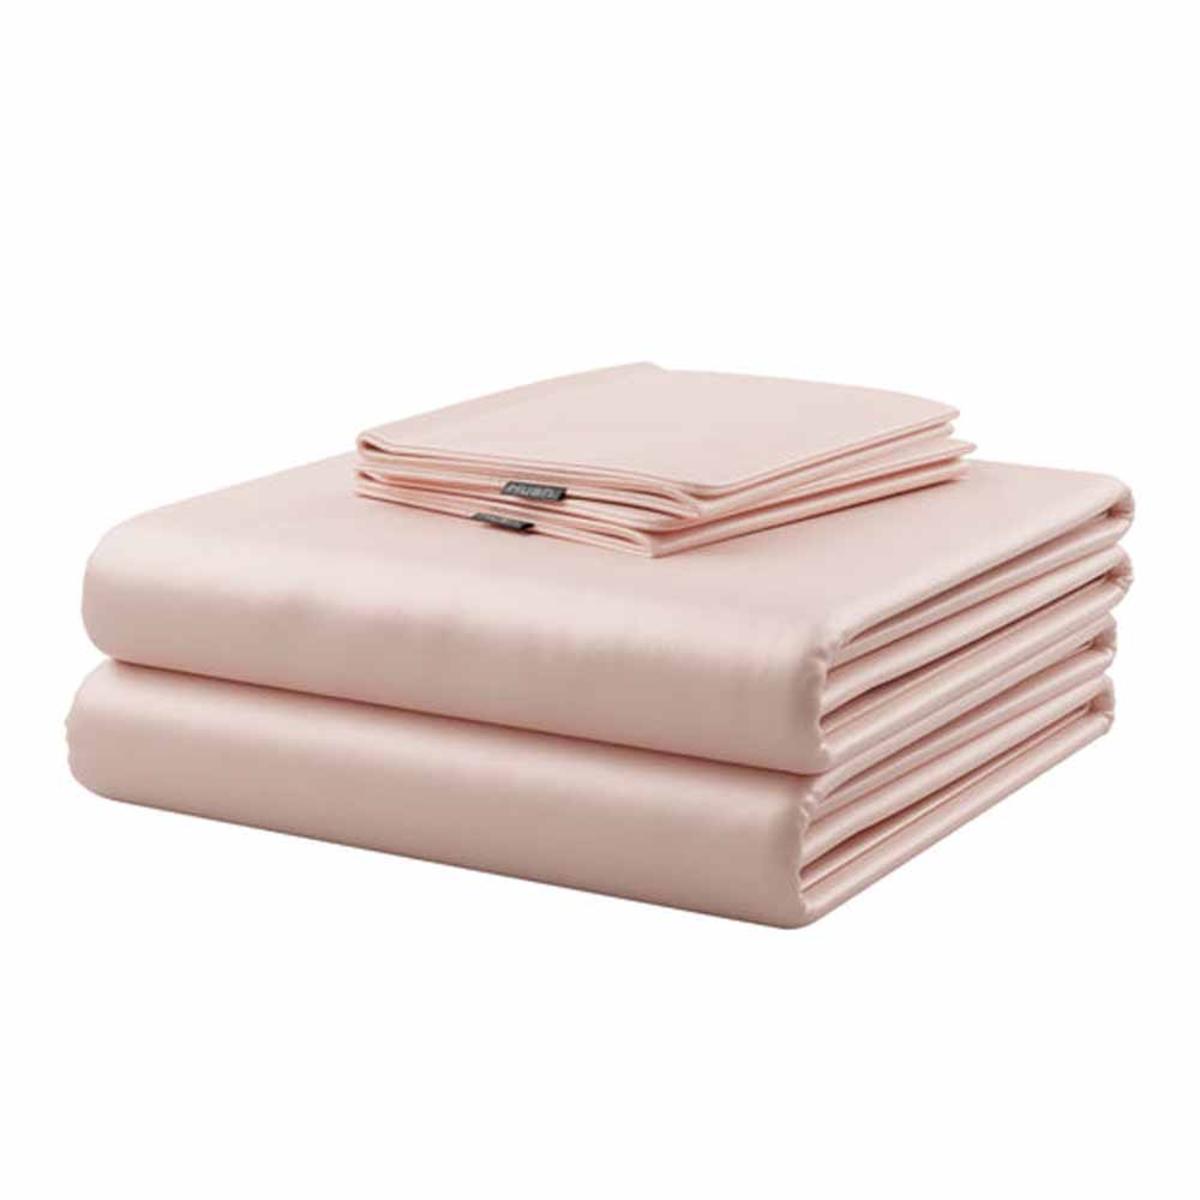 Hush Iced Cooling Sheet and Pillowcase Set - TwinXL